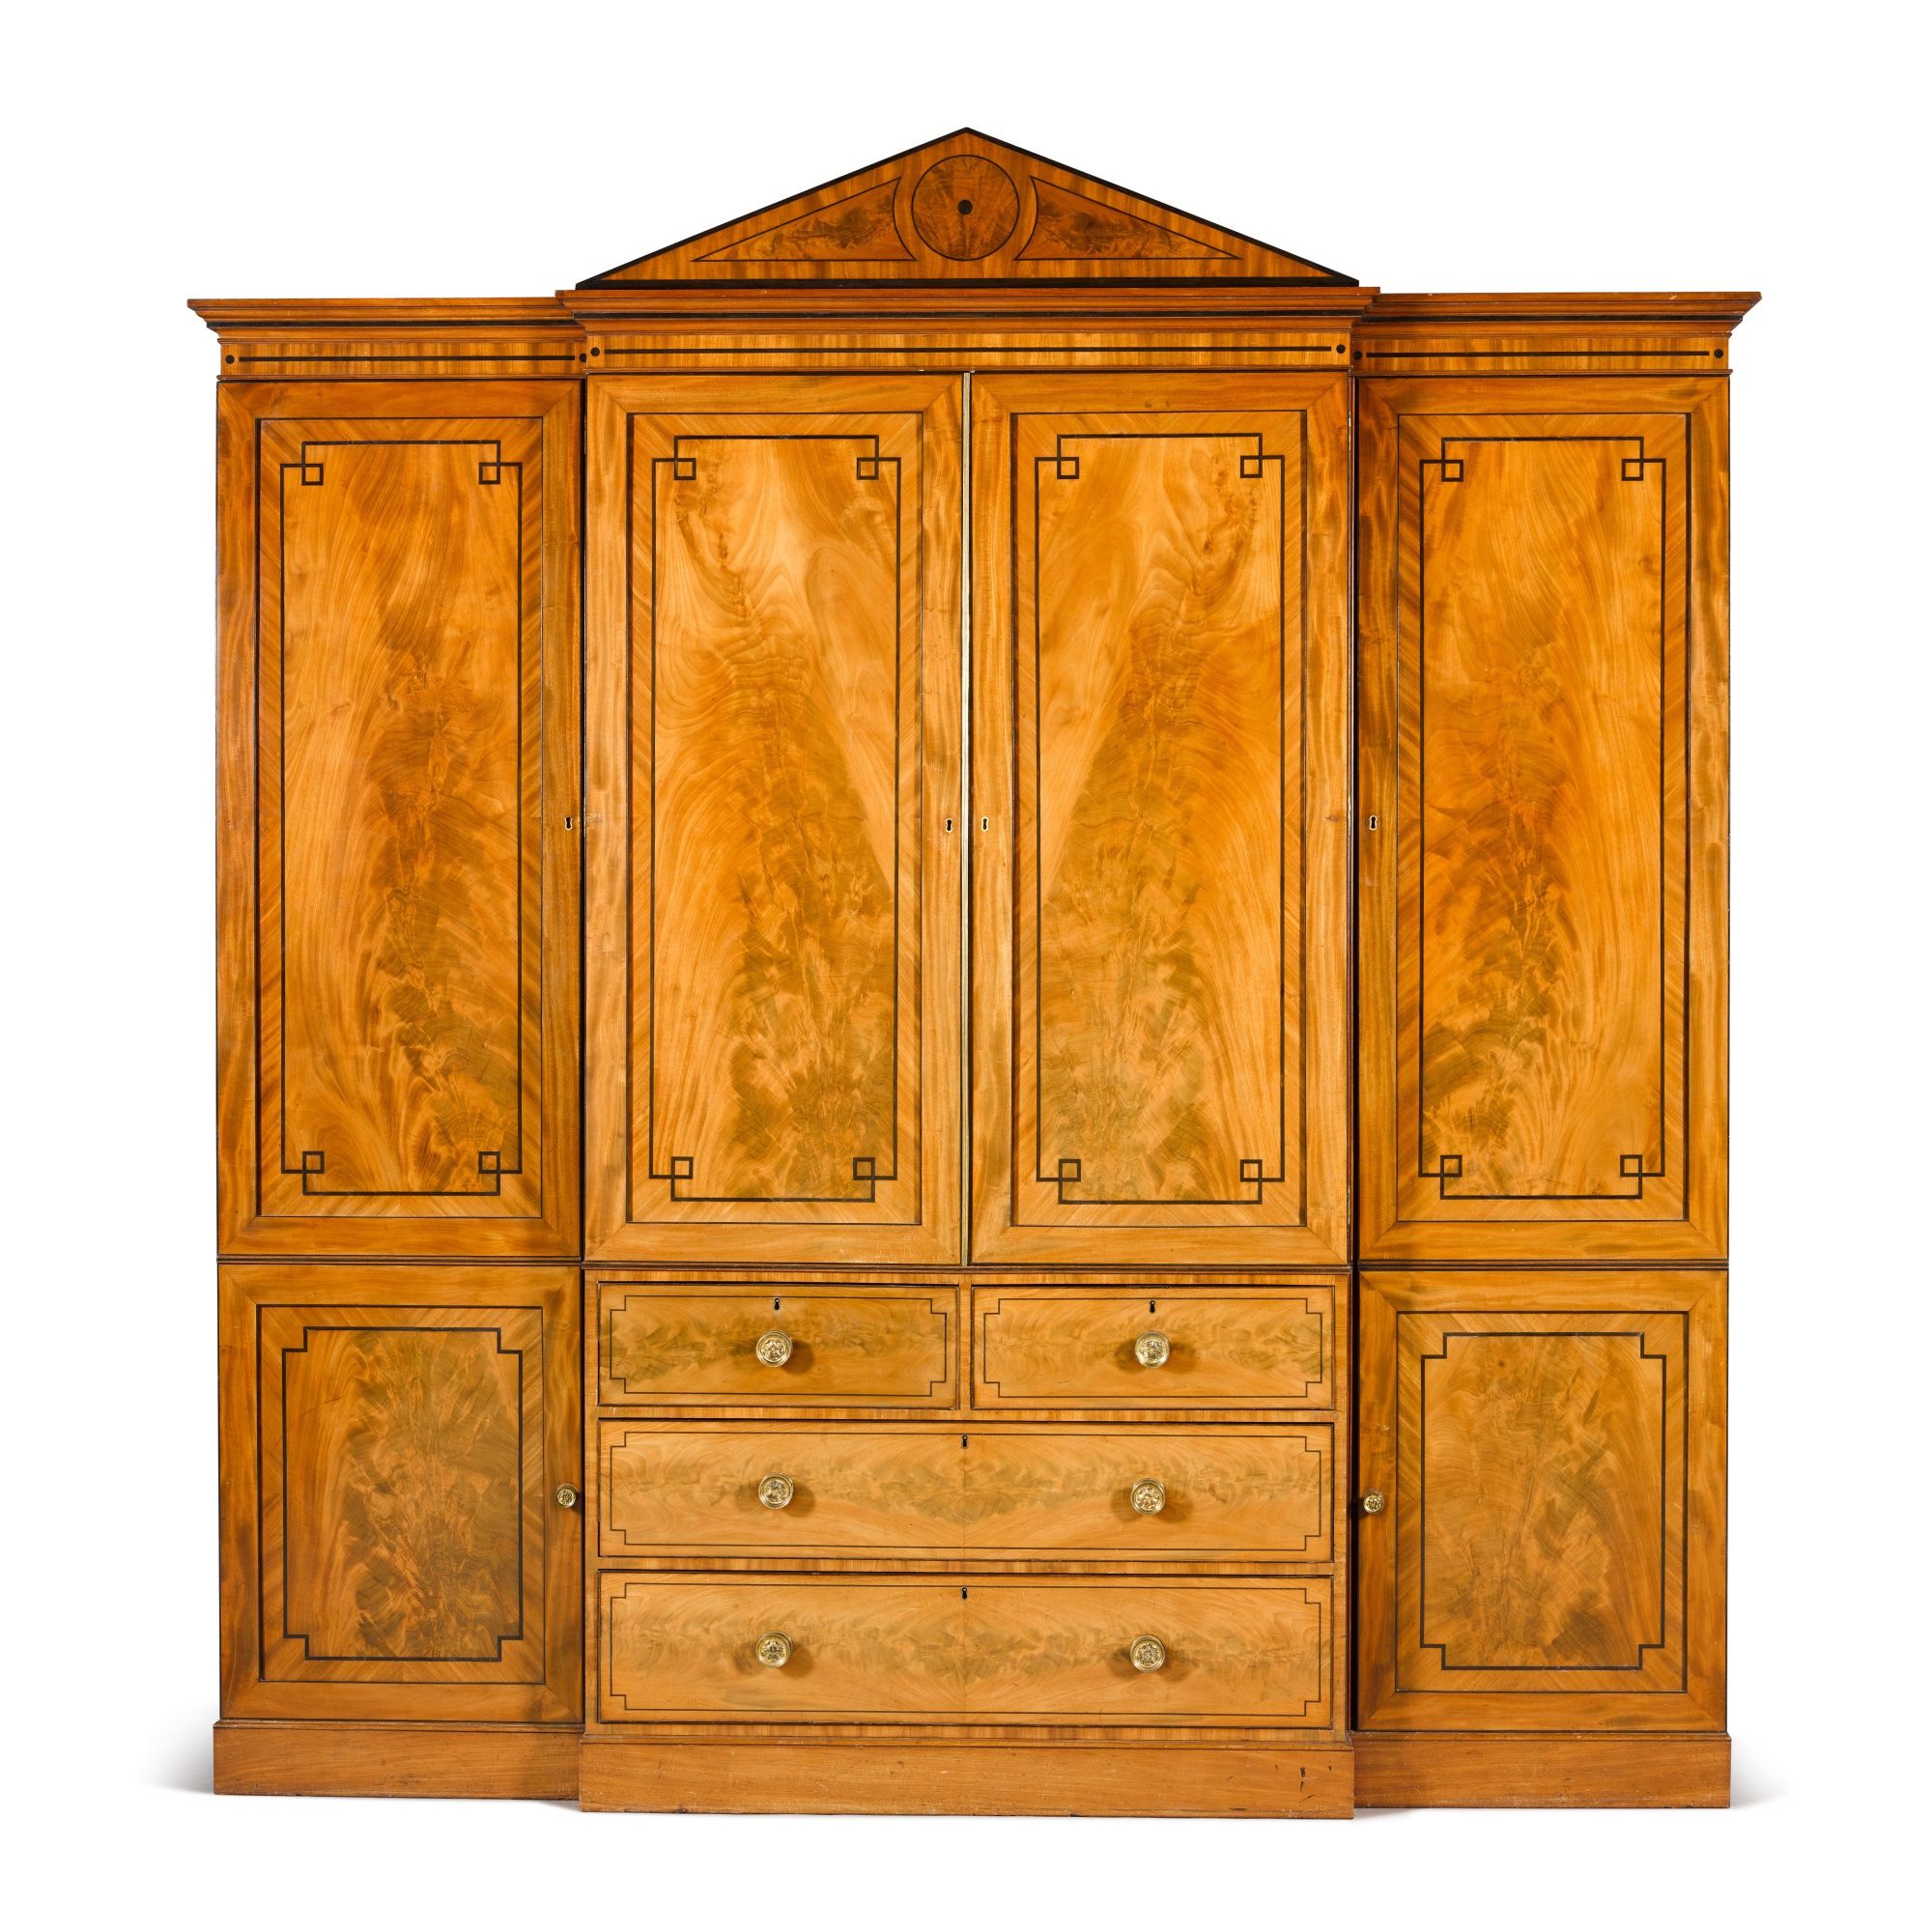 A Regency Mahogany And Ebony Strung Breakfront Wardrobe, Early 19th Century  | Kenneth Neame: Cadogan Square And Mayfair | 2022 | Sotheby's Inside Georgian Breakfront Wardrobes (Gallery 17 of 20)